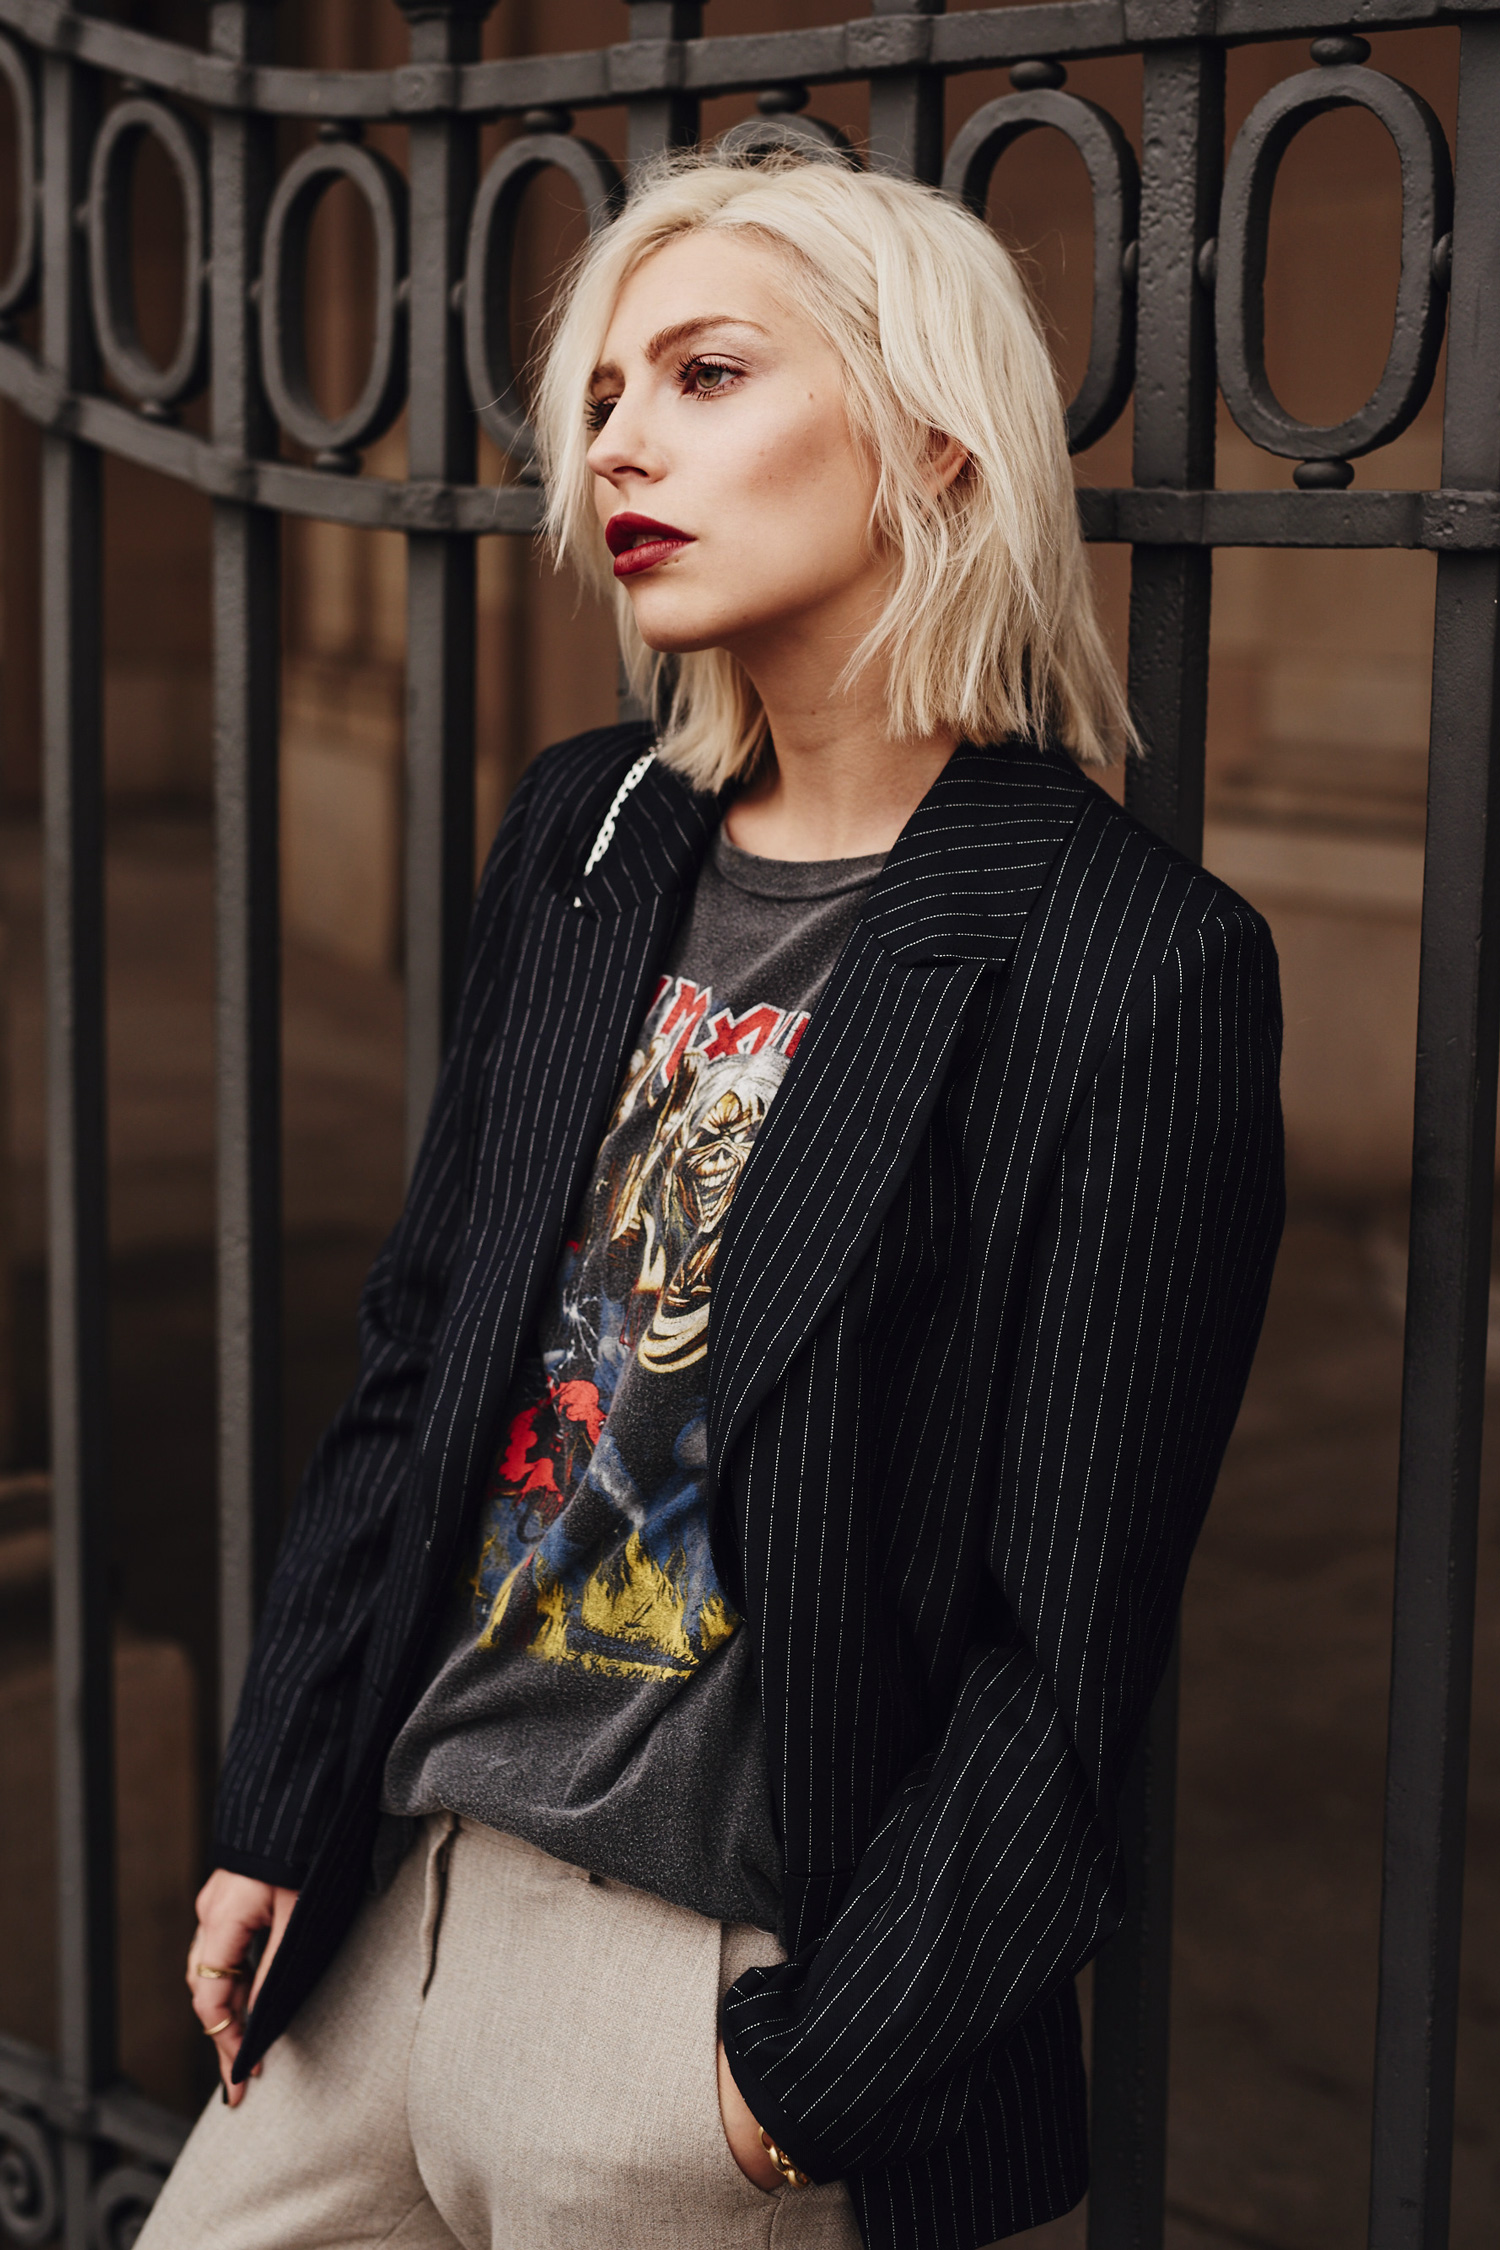 view more details on my blog | wearing an Iron Maiden band shirt with a blazer and loafers | mixing edgy, grunge and classy | street style, fashion, outfit